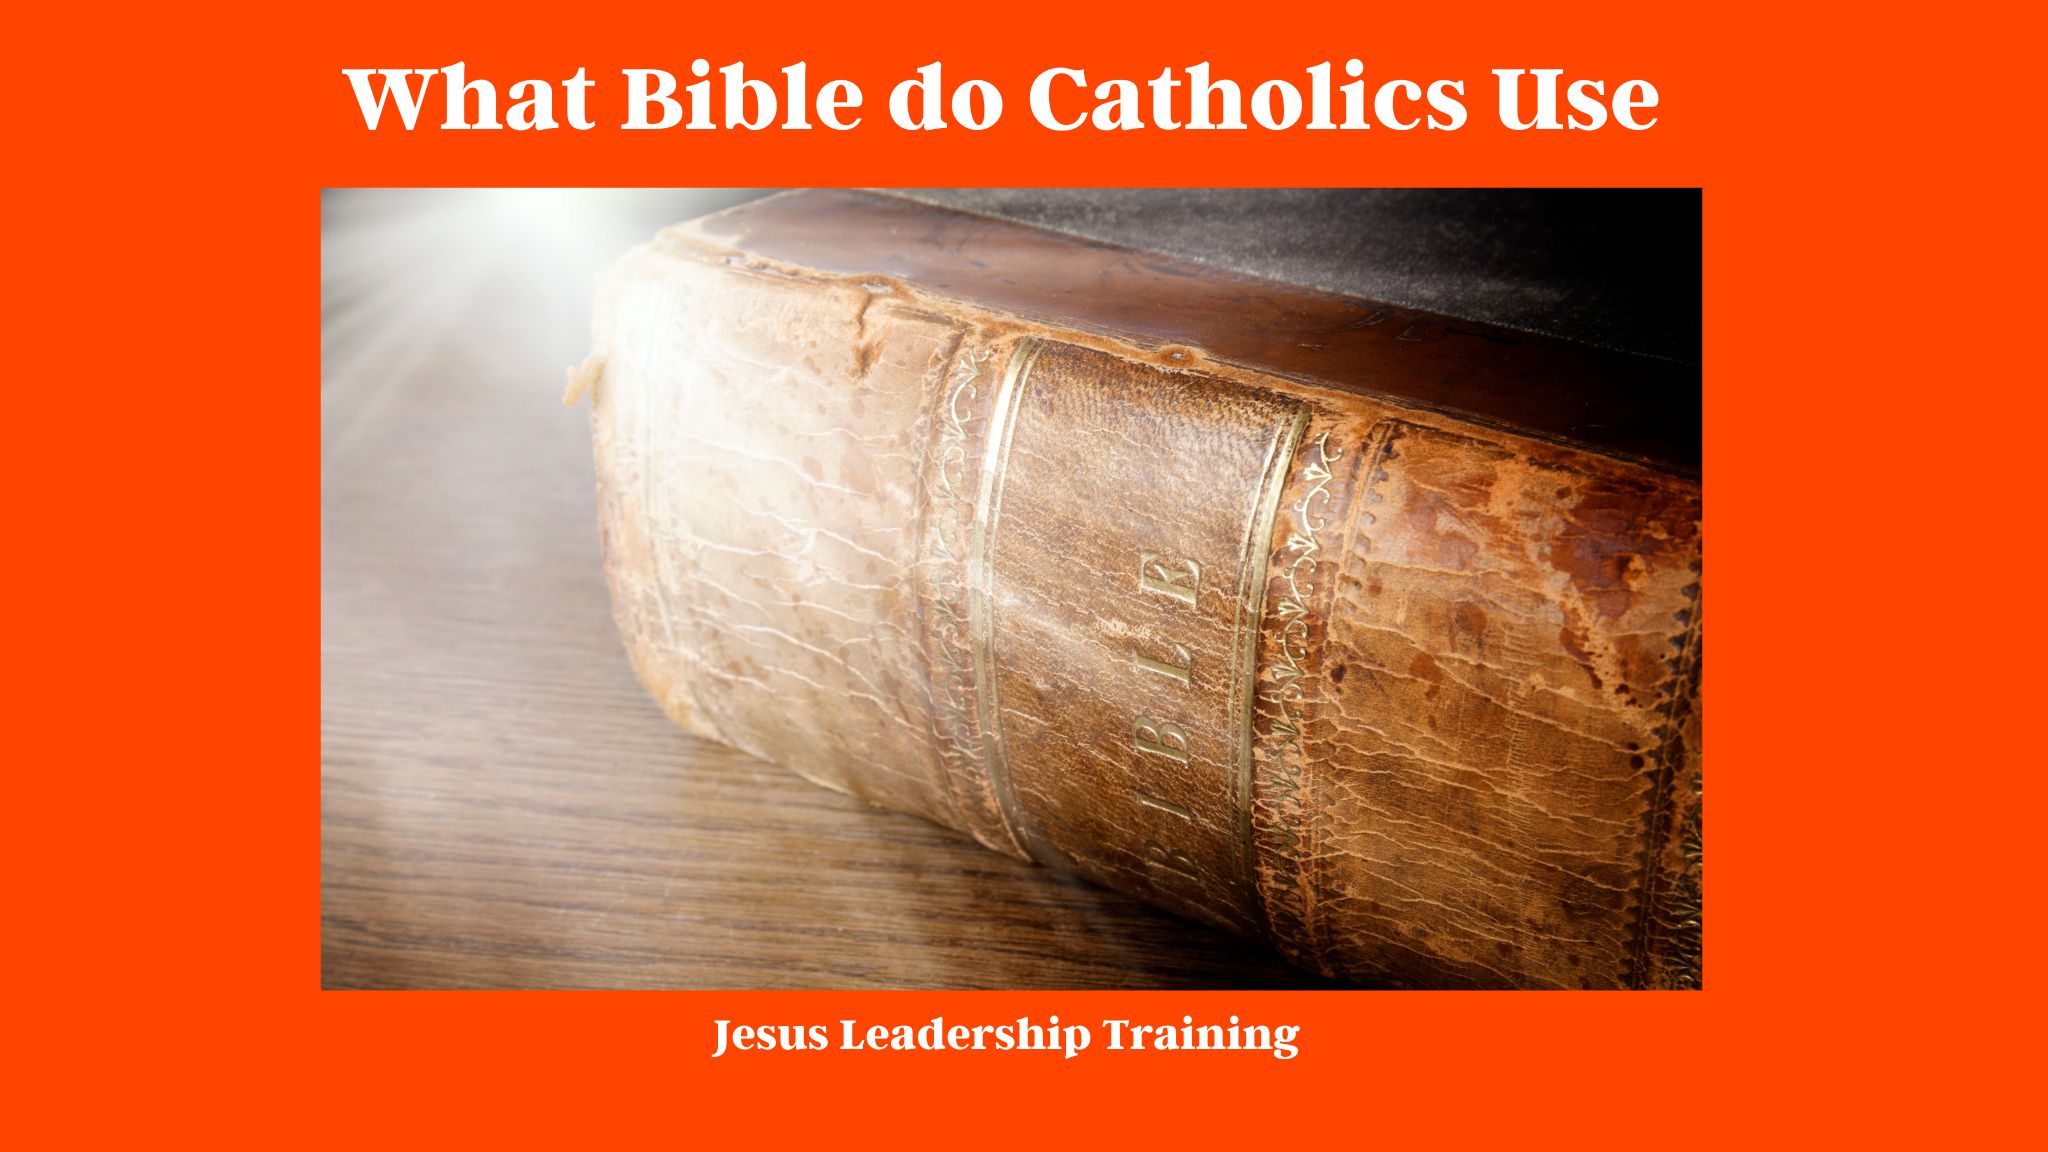 Jesus Leadership Training - Found another Online Resource - Online Bible Classes at Mech Institute